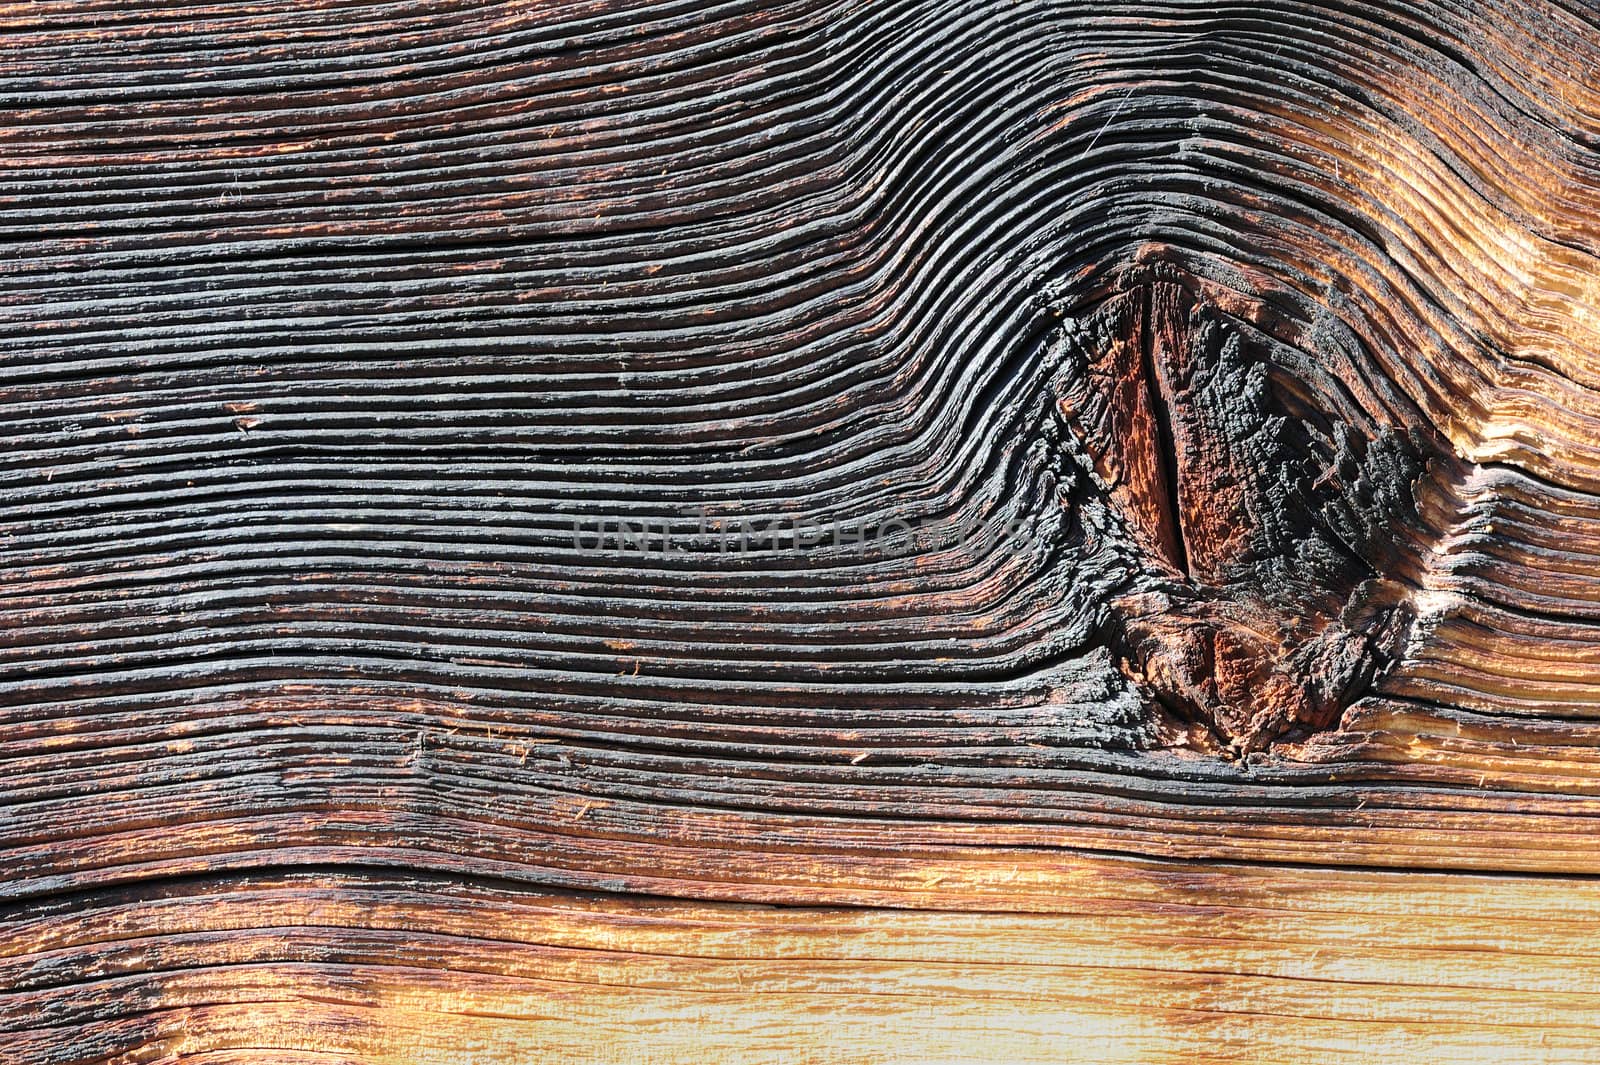 Macro of a pine plank with a knot in it. Suitable as a natural background